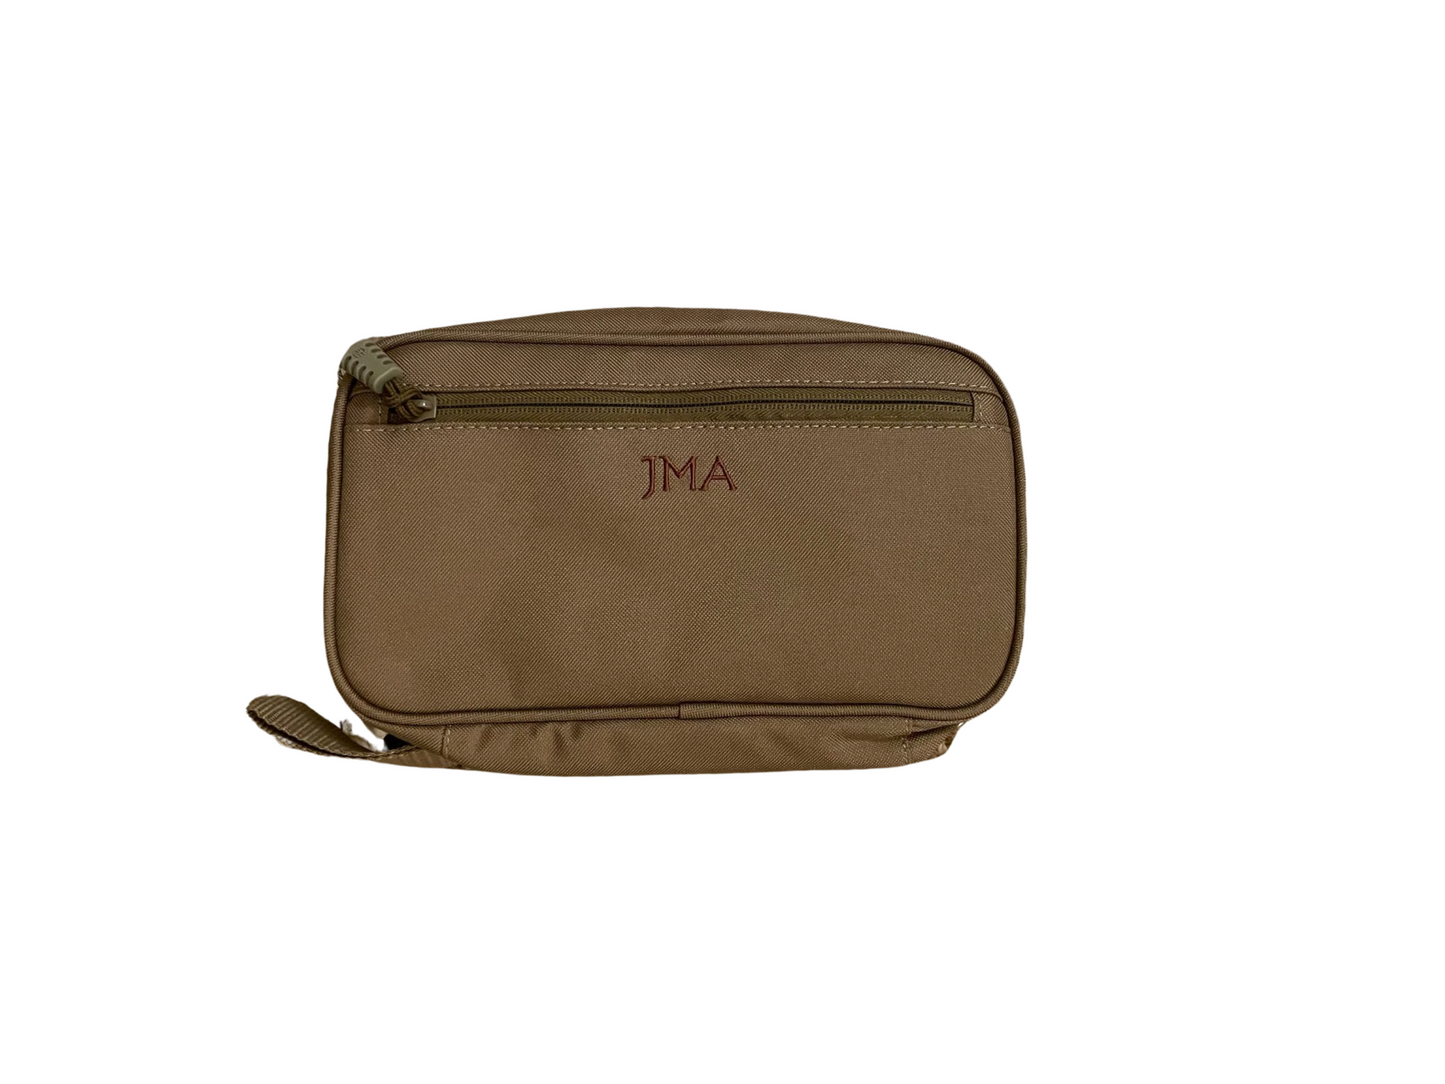 Concho Hanging Toiletry Bag in Coyote Brown